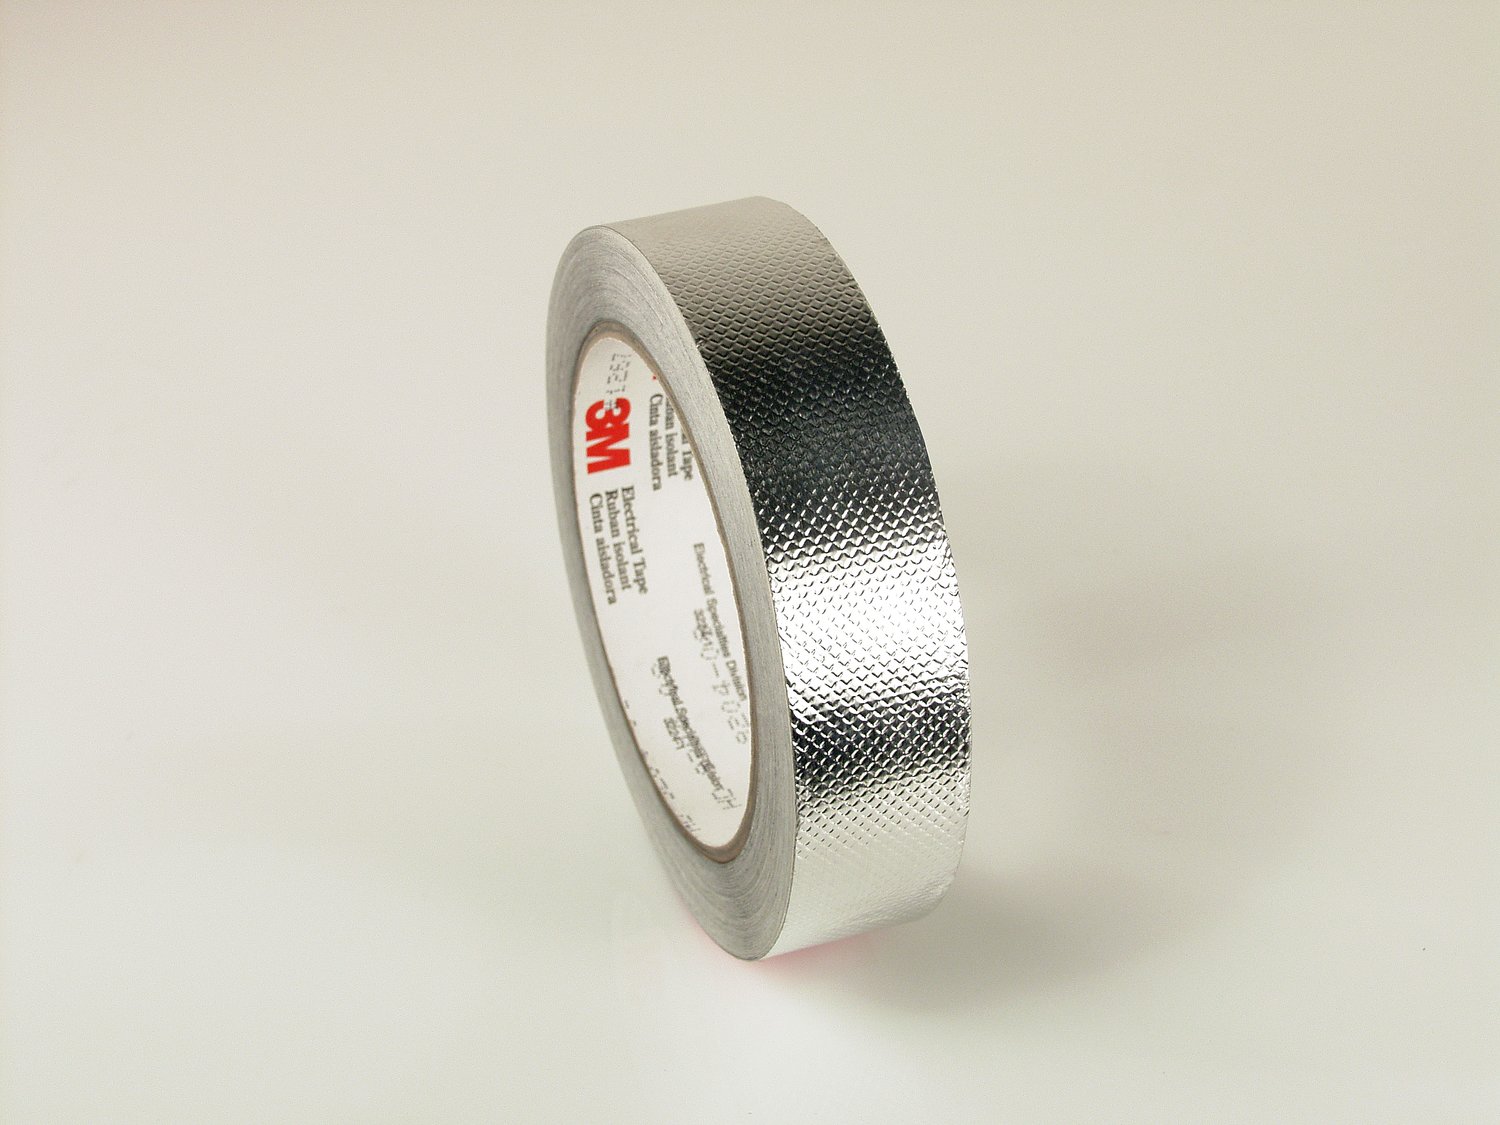 7000132143 - 3M Embossed Aluminum Foil EMI Shielding Tape 1267, 23 in x 18 yd, 3 in
Paper Core, Untrimmed Potted Log Roll, 1 Roll/Case